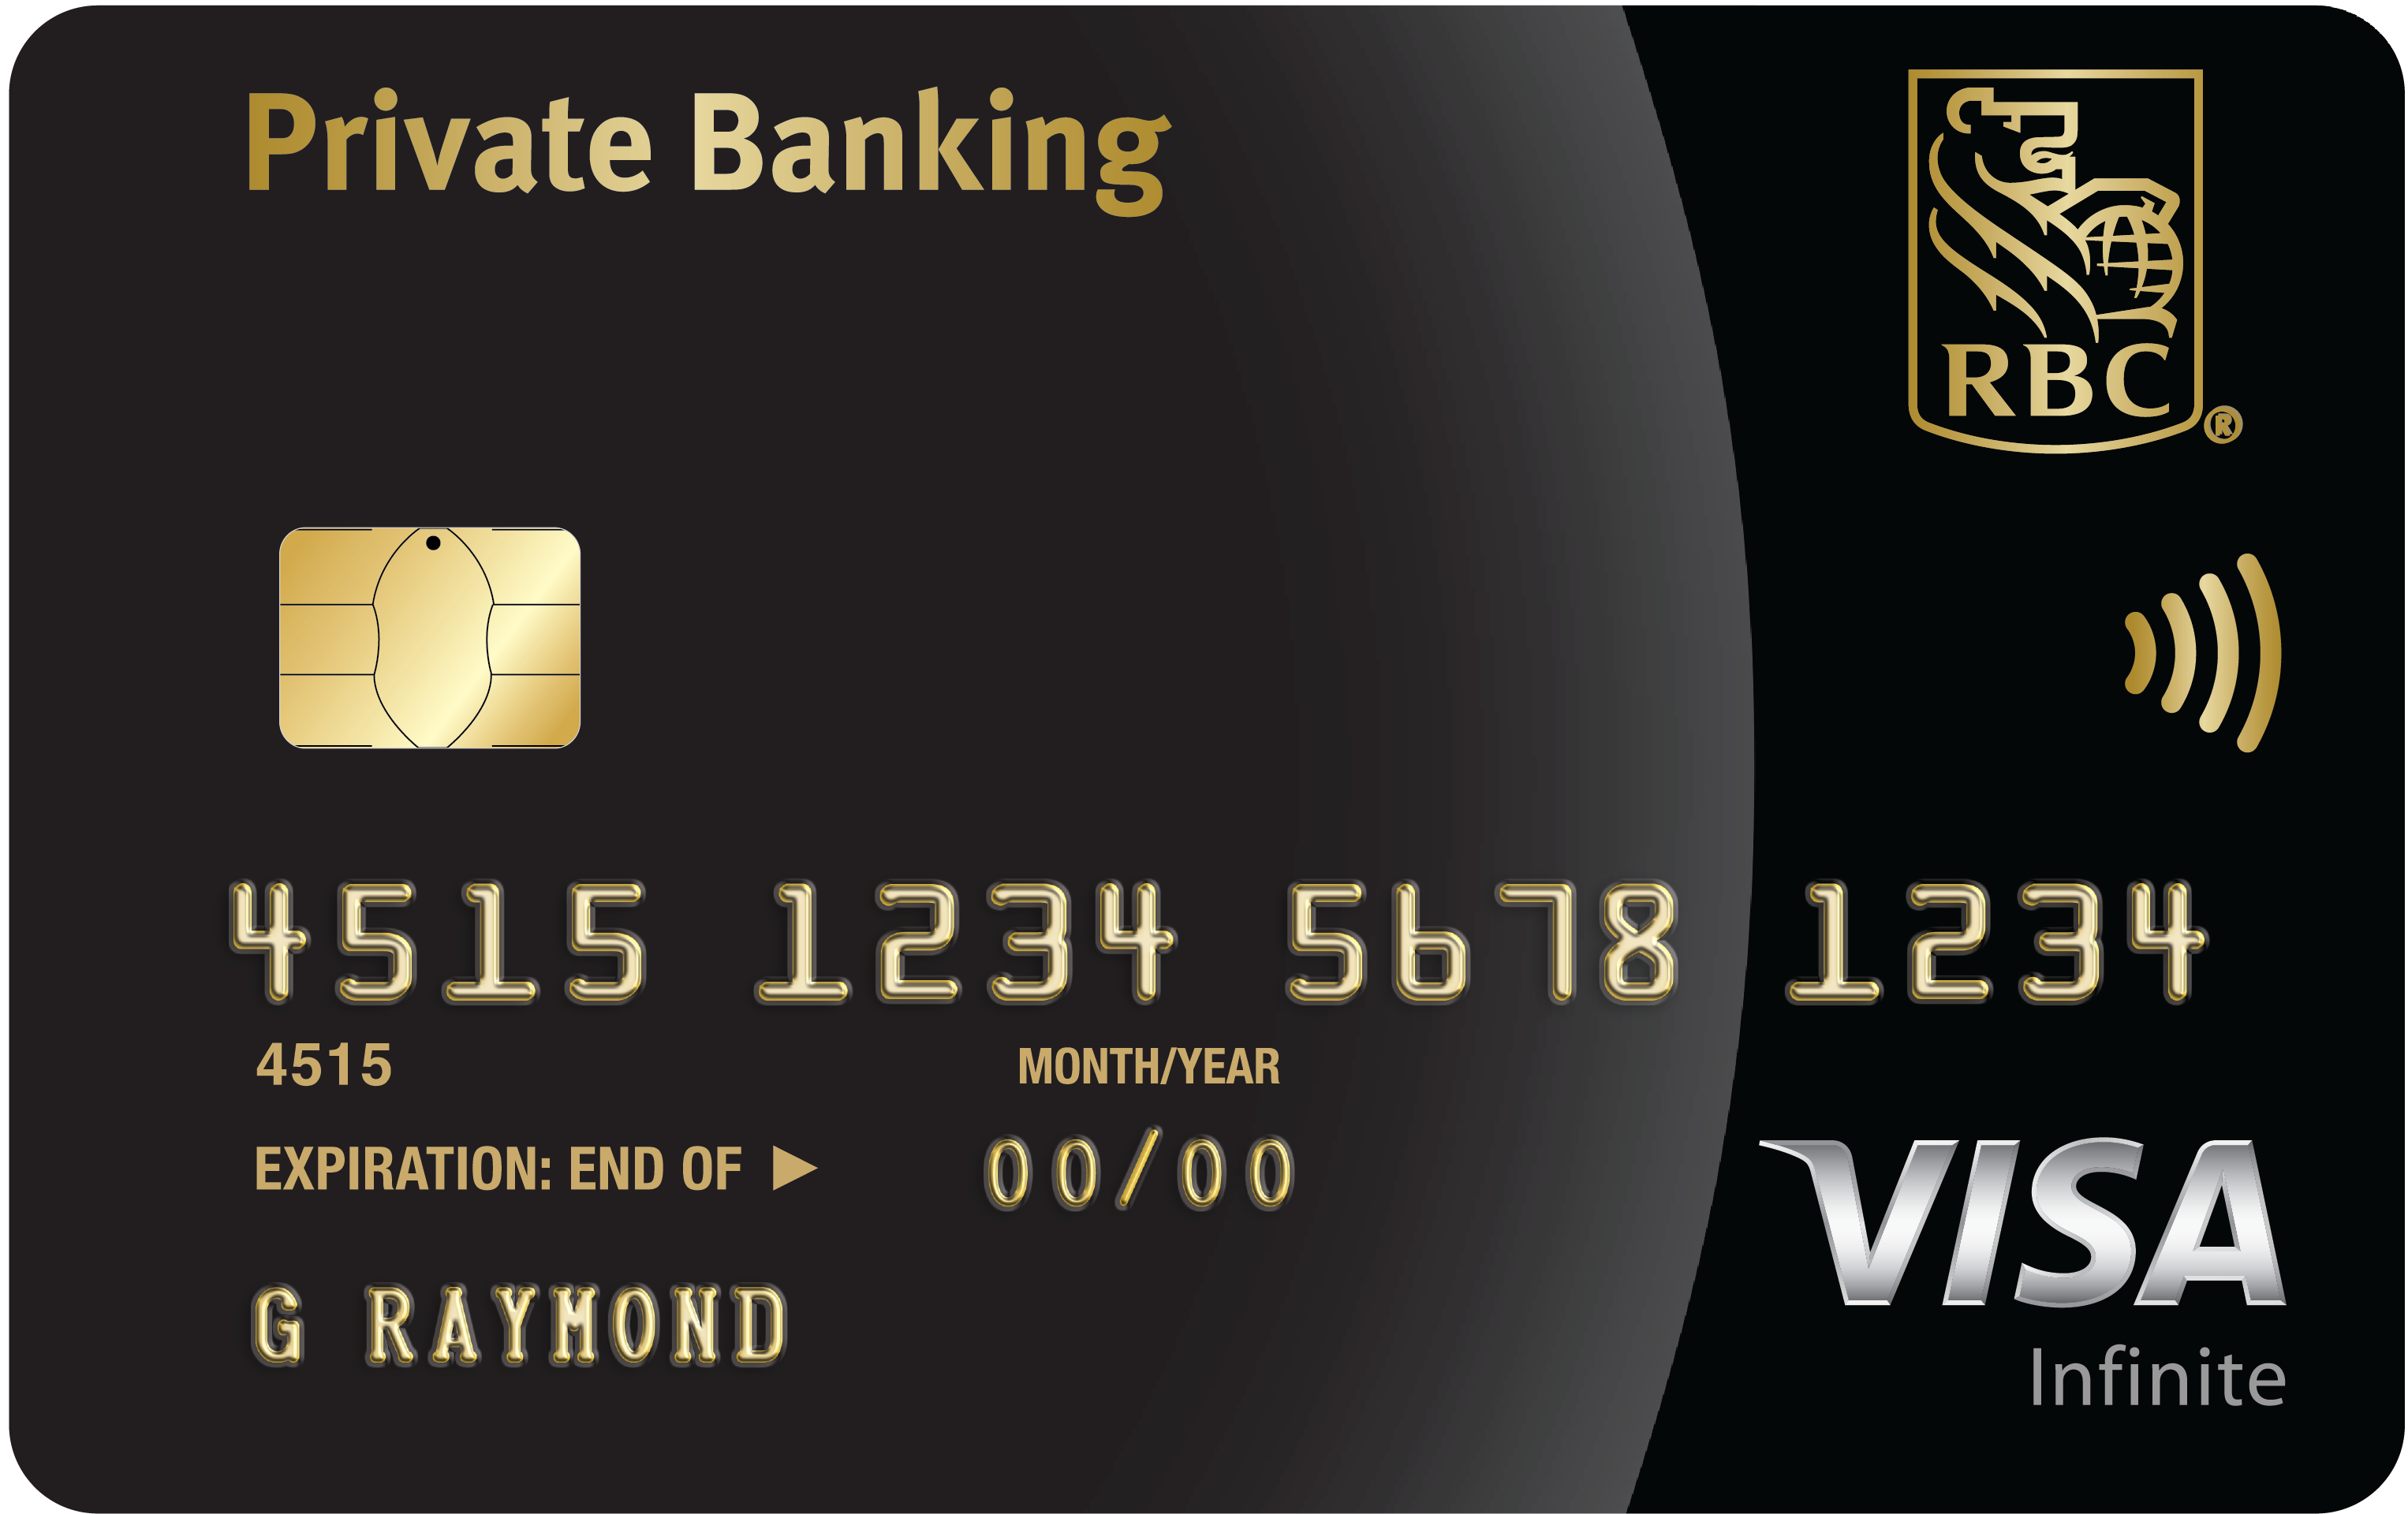 Activate Visa Gift Card